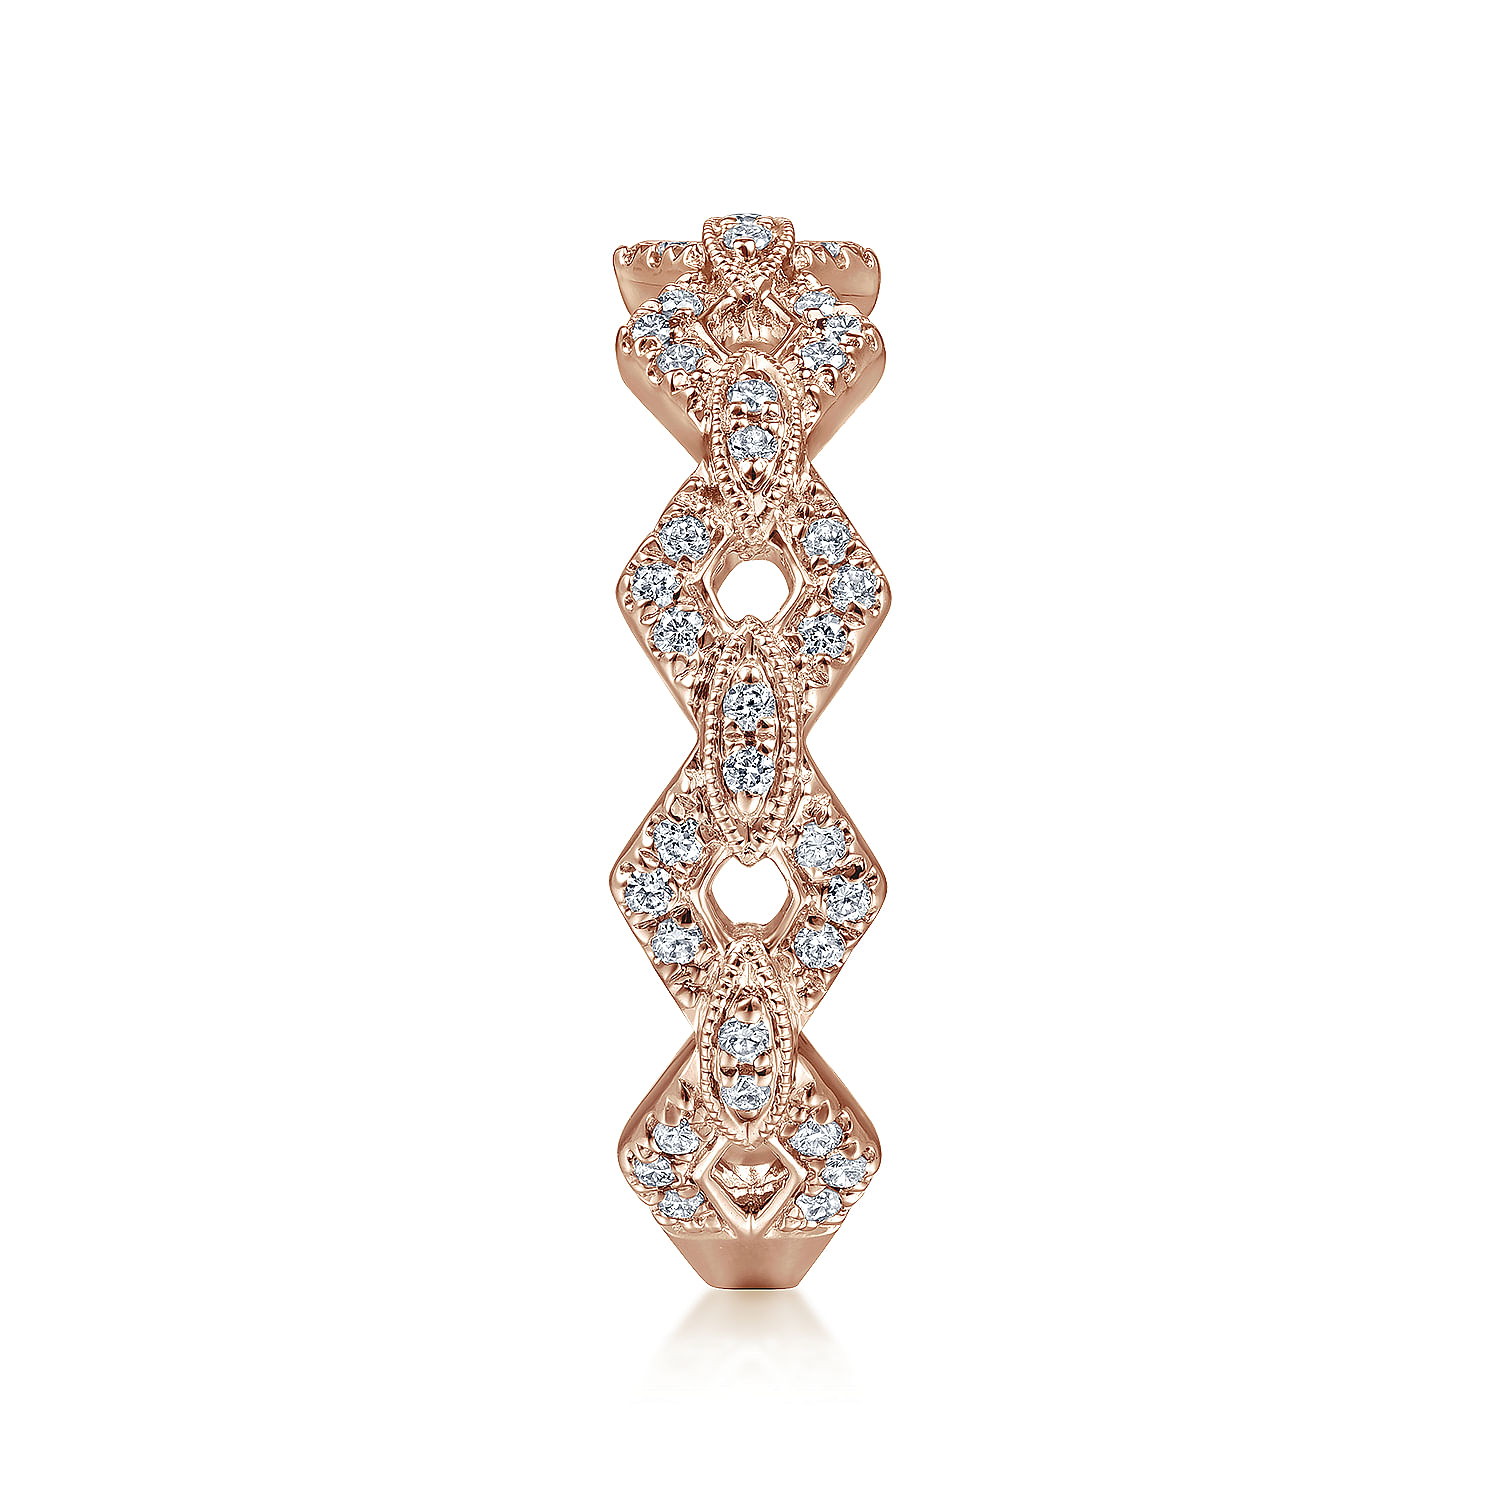 14K Rose Gold Chain Link Stackable Diamond Ring